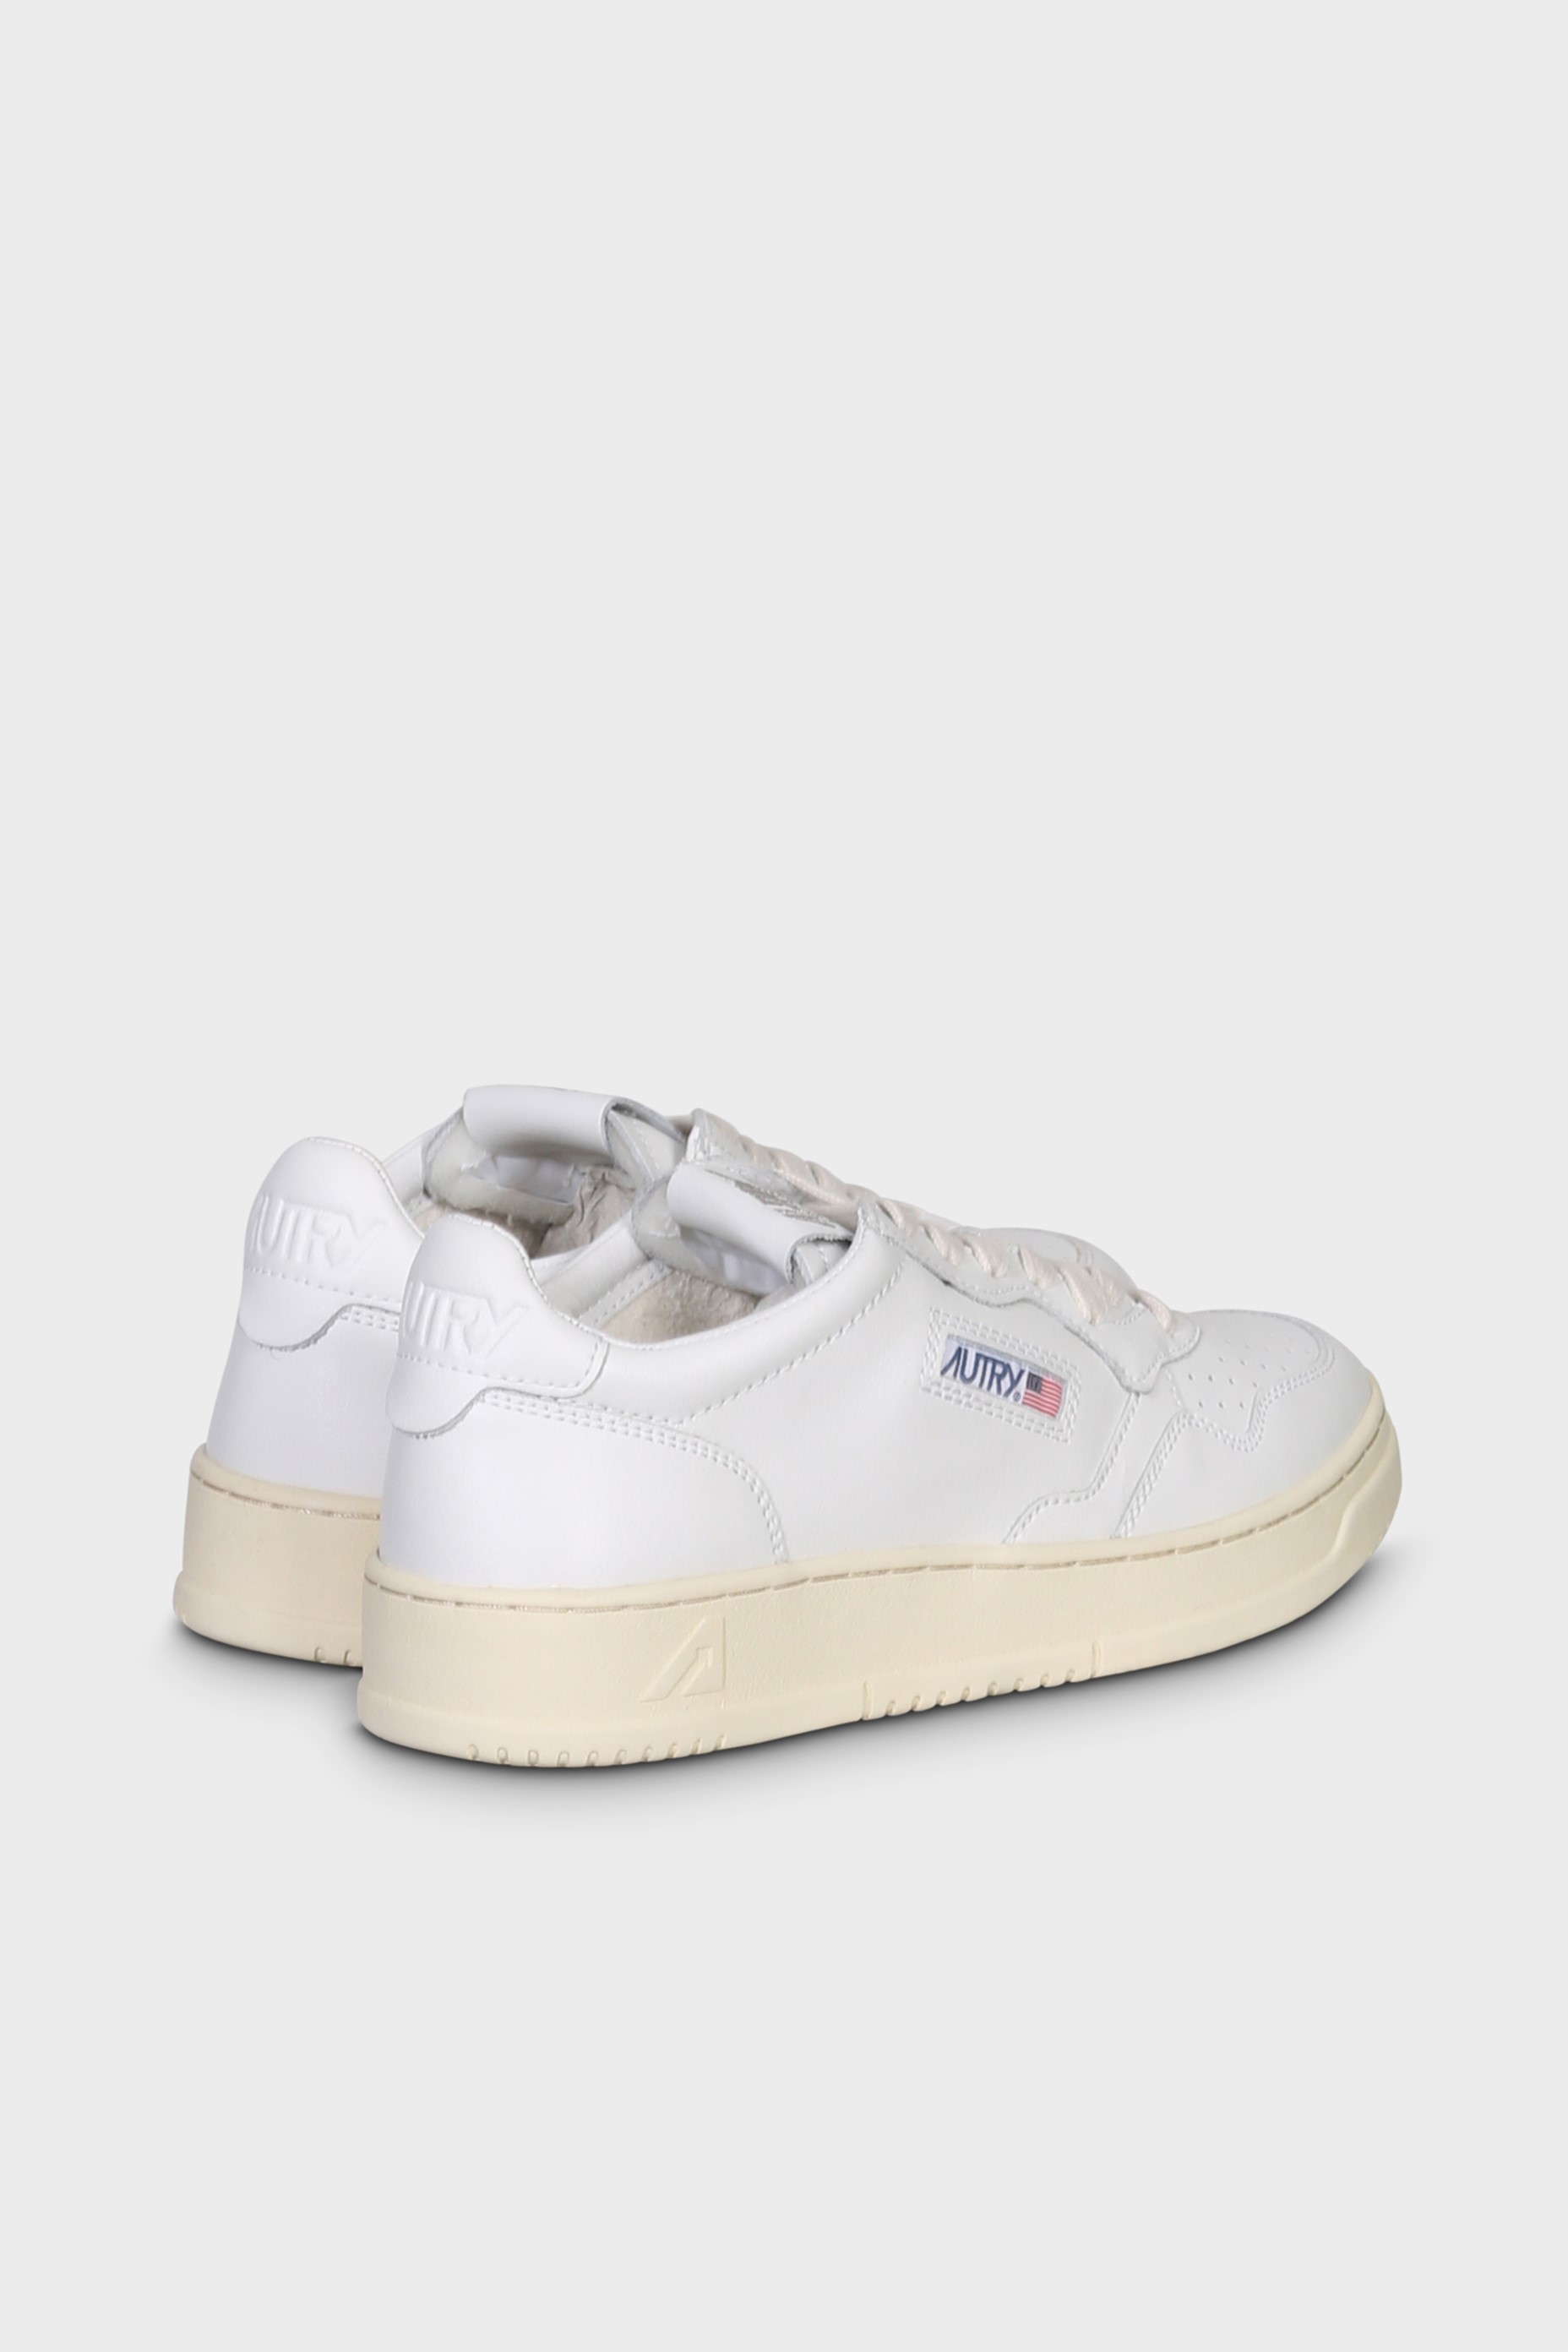 AUTRY ACTION SHOES Sneaker Low in White/White 41